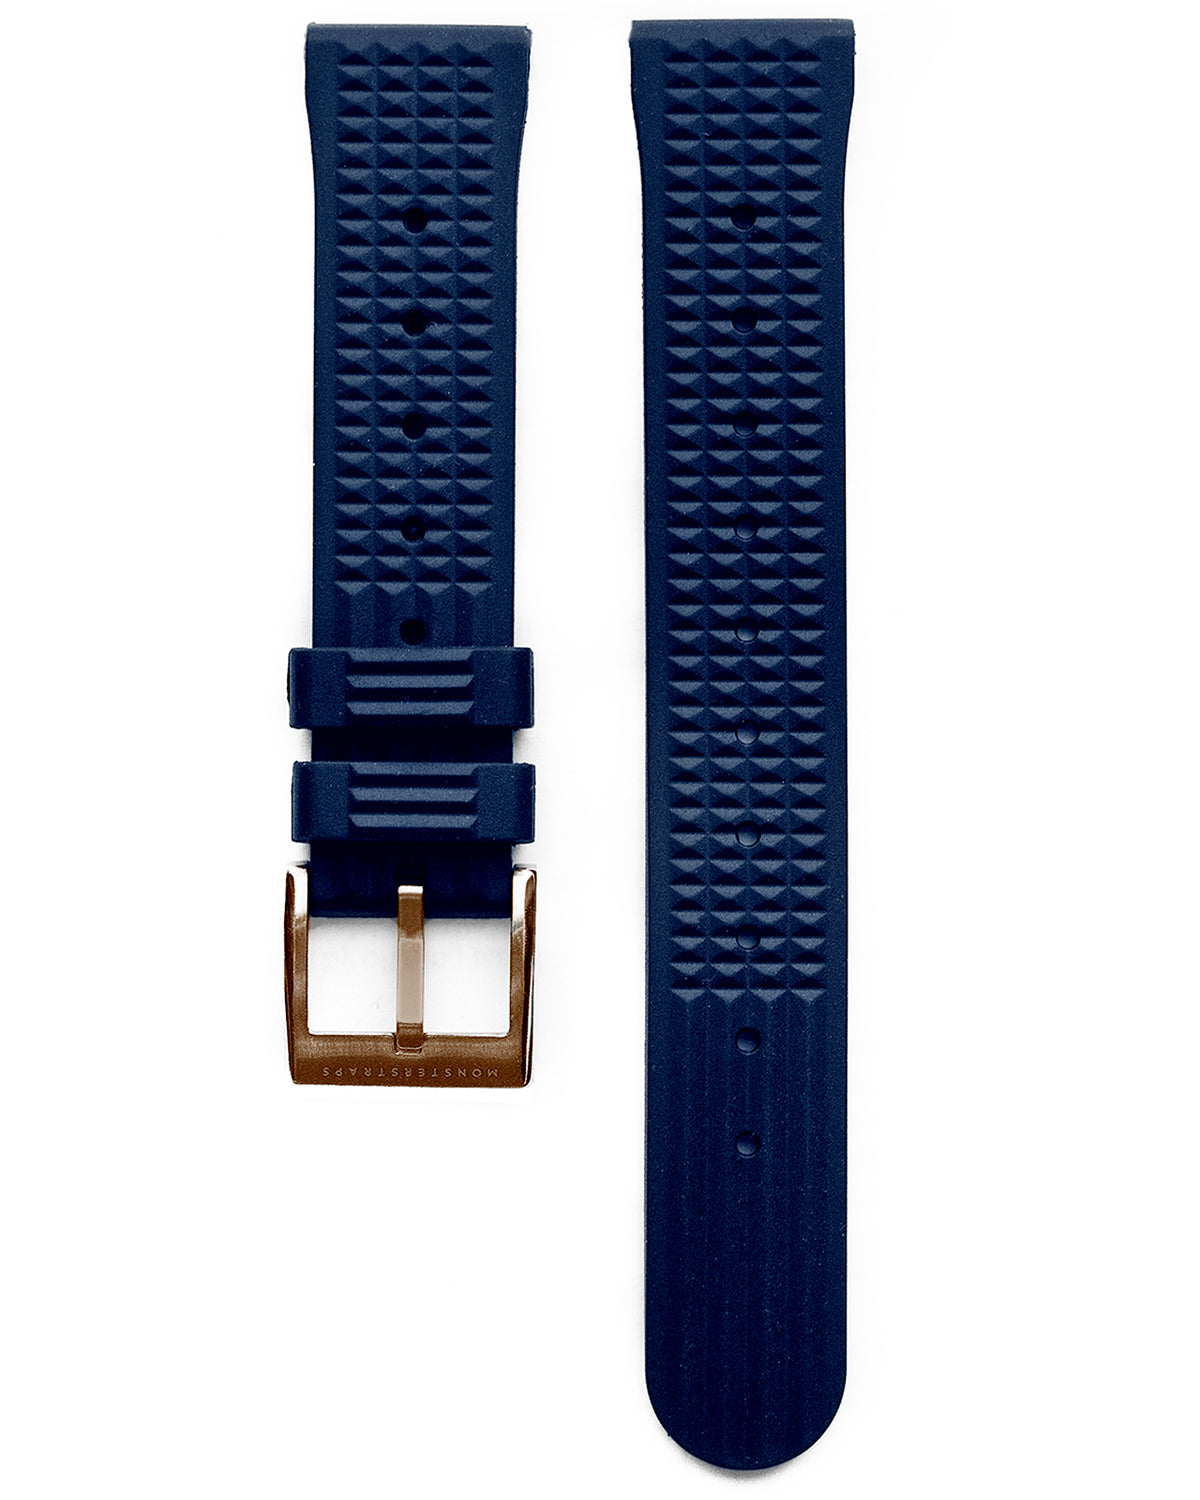 VULCANISED RUBBER - WAFFLE STRAP (NAVY, VINTAGE STYLE) - Monstraps